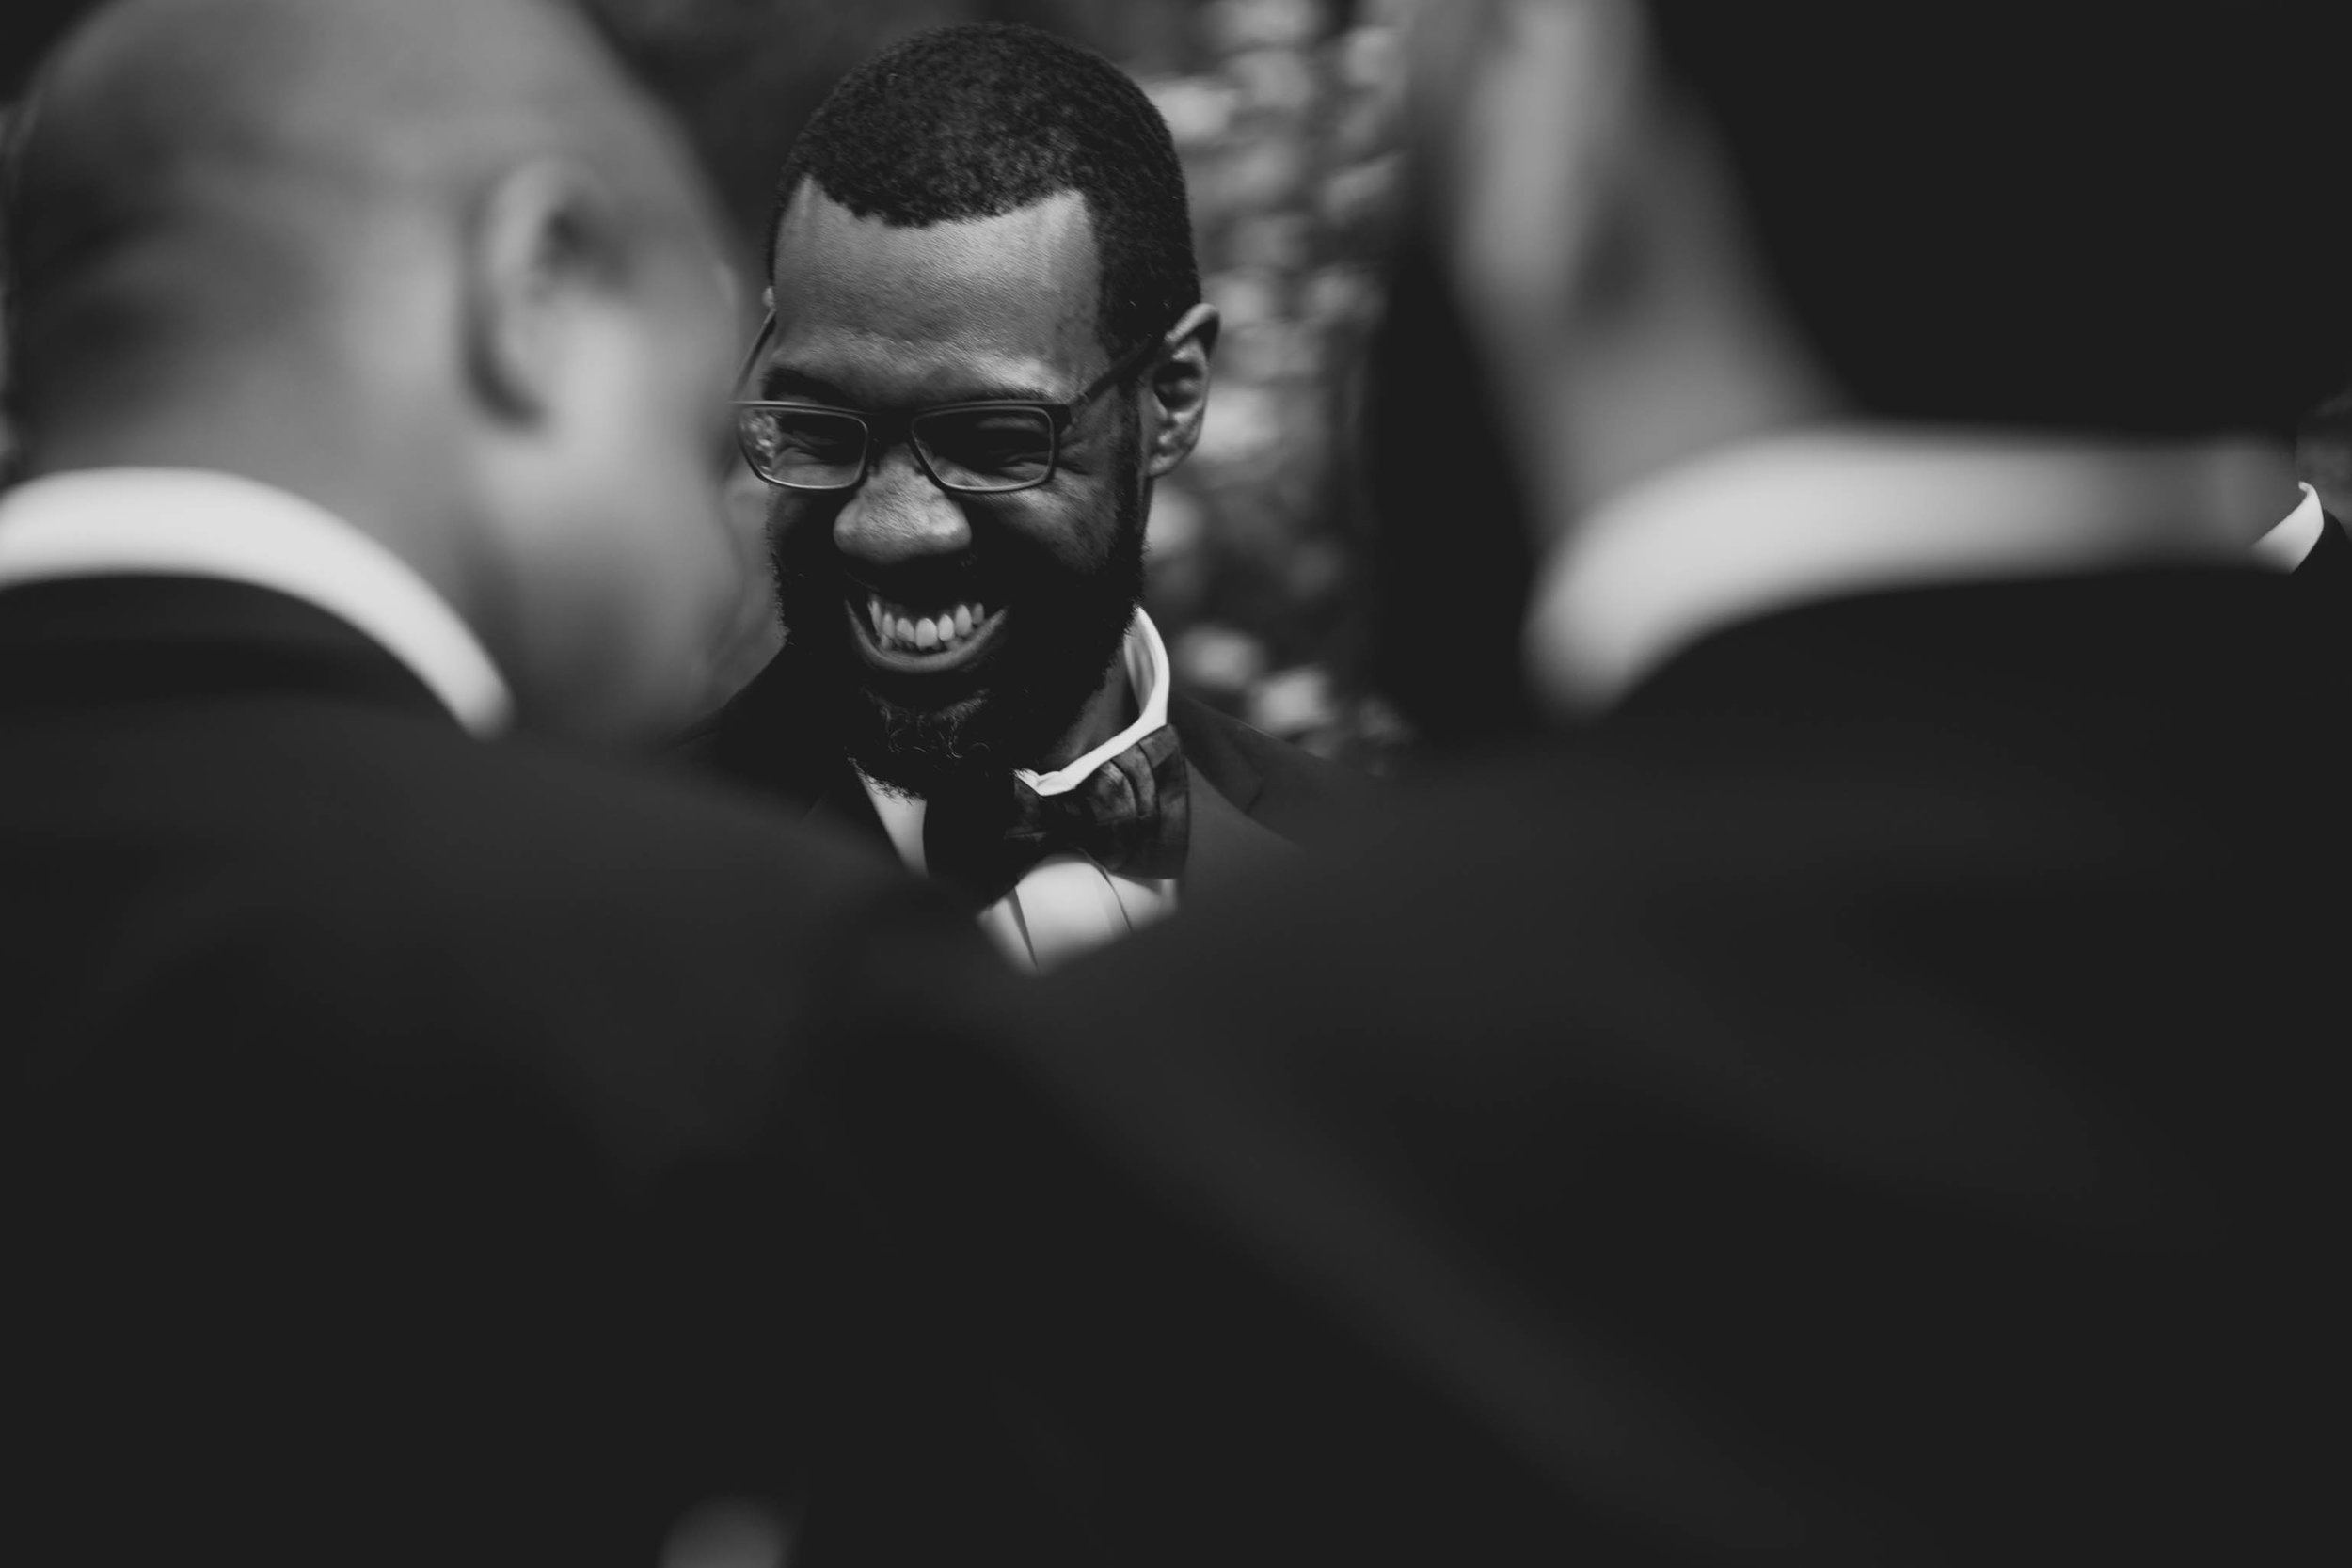 The groom and groomsmen sharing a laugh after the ceremony